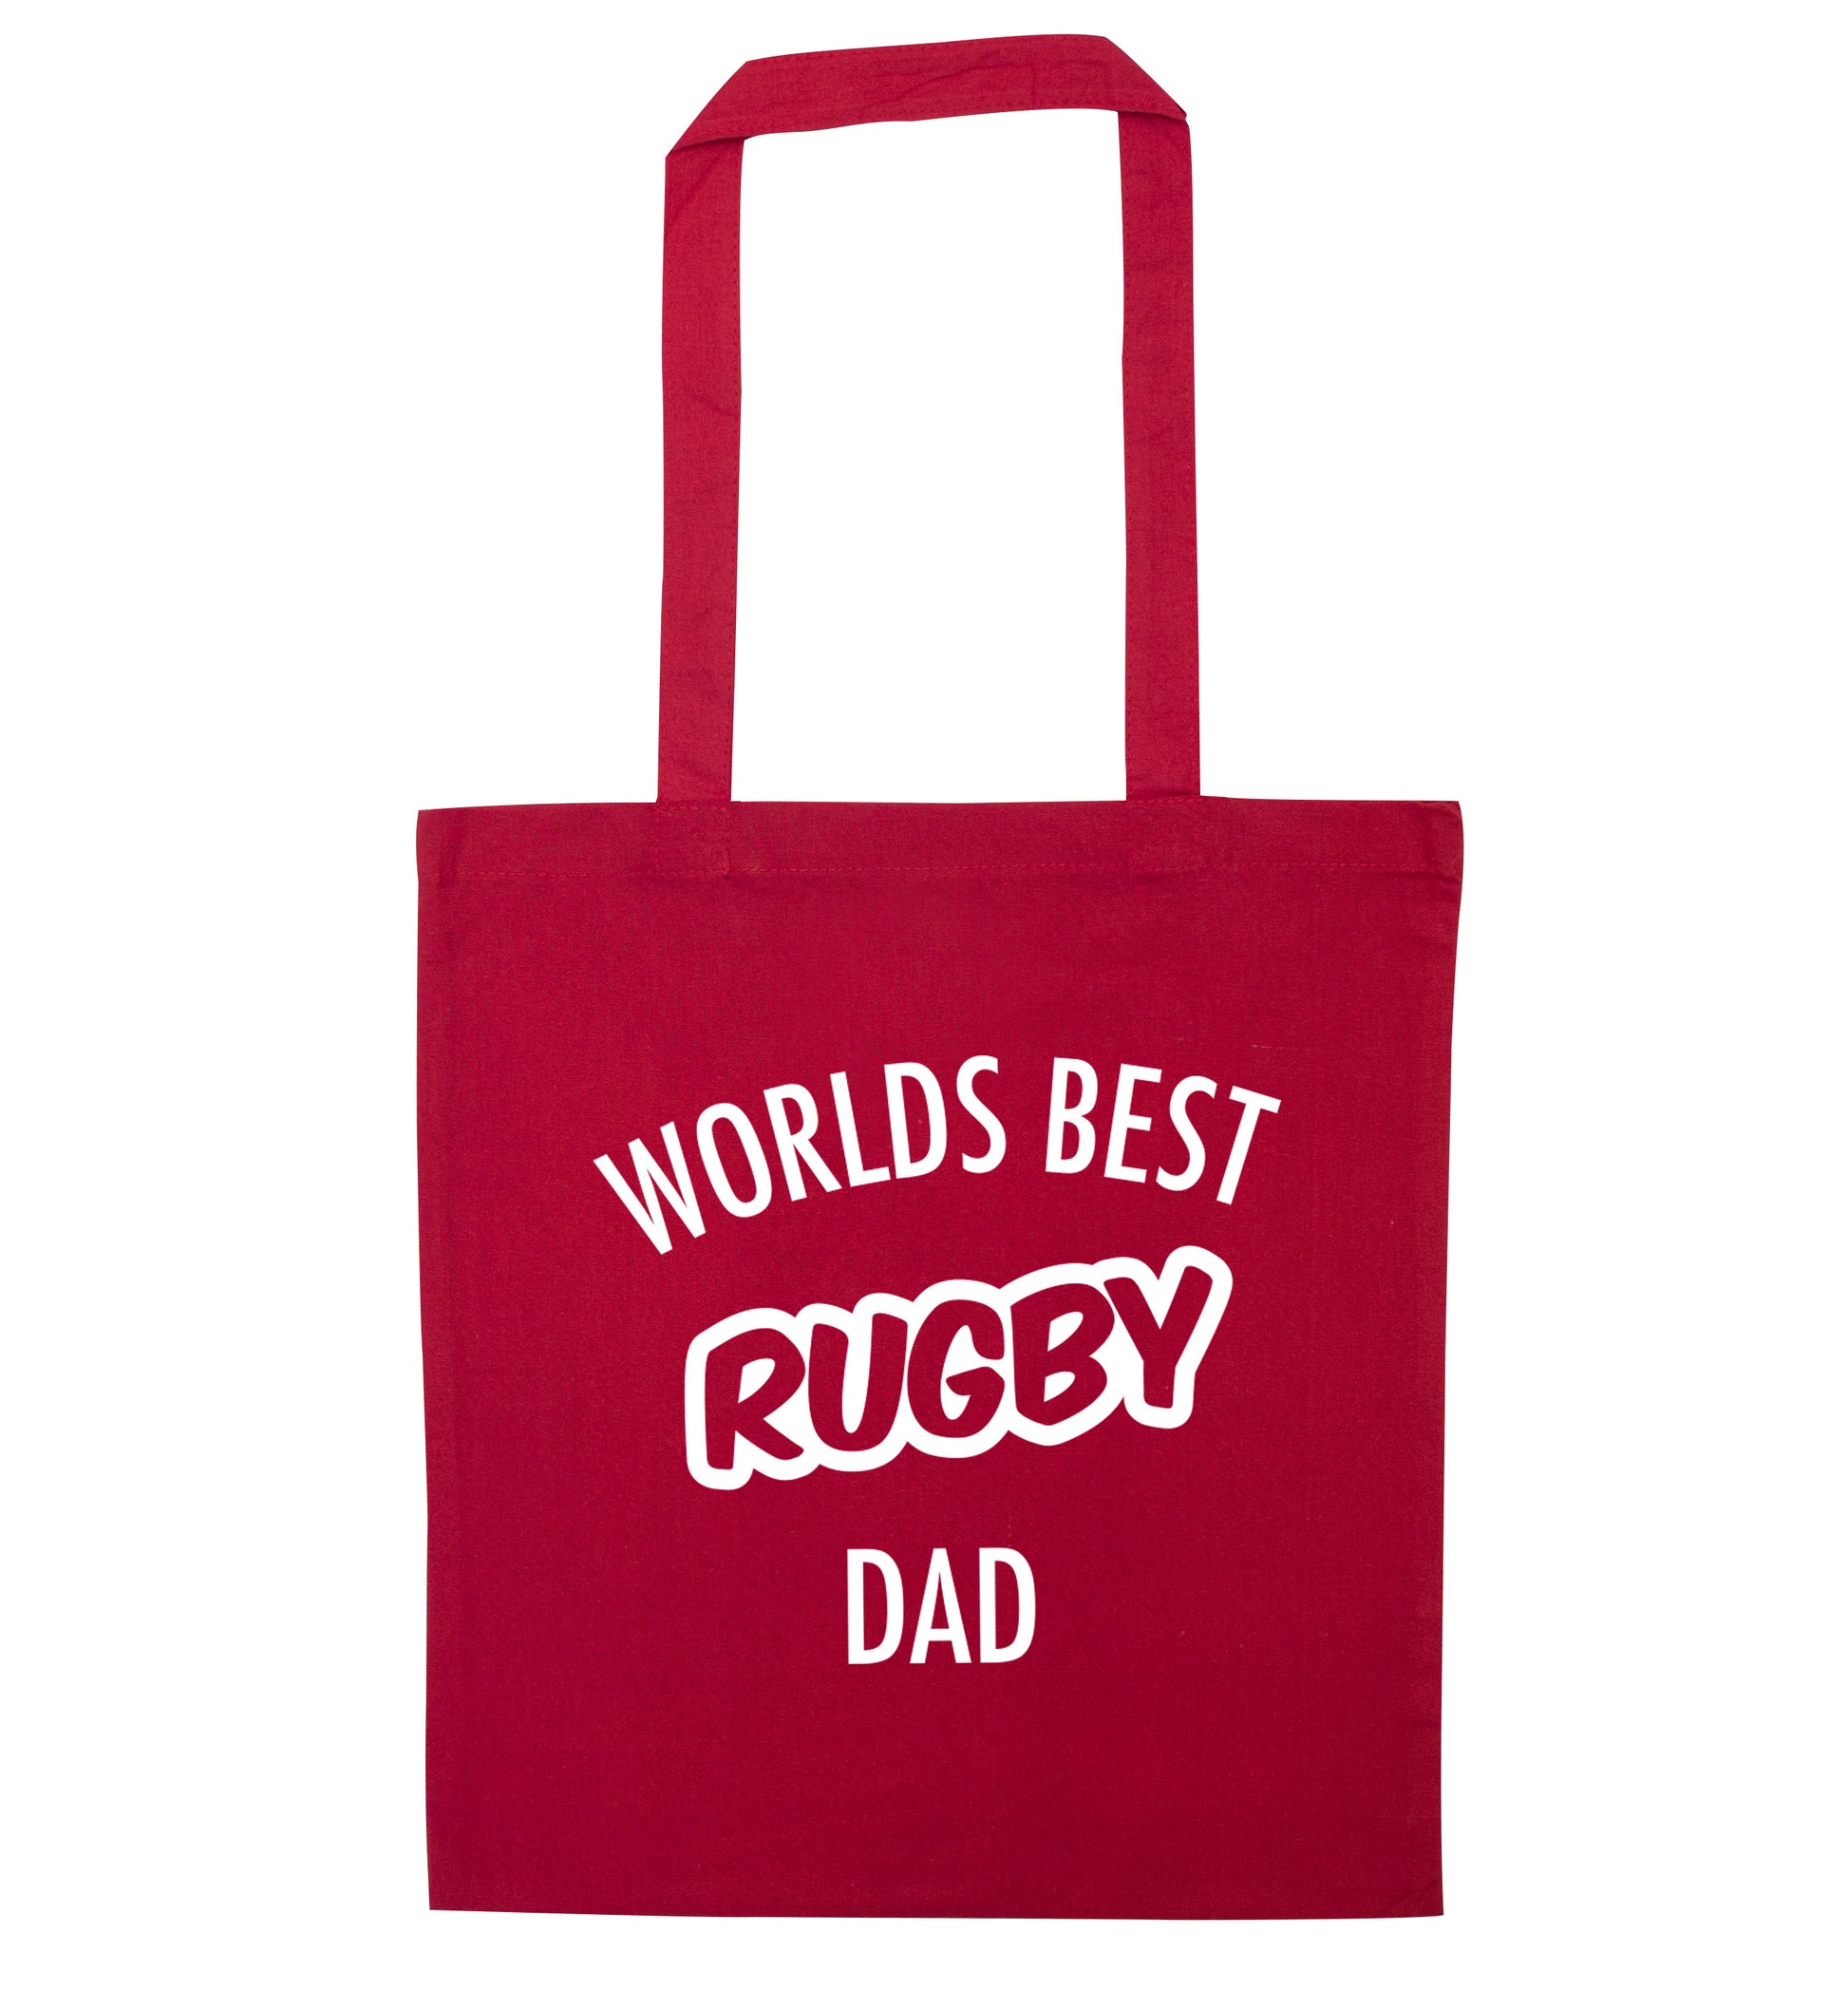 Worlds best rugby dad red tote bag